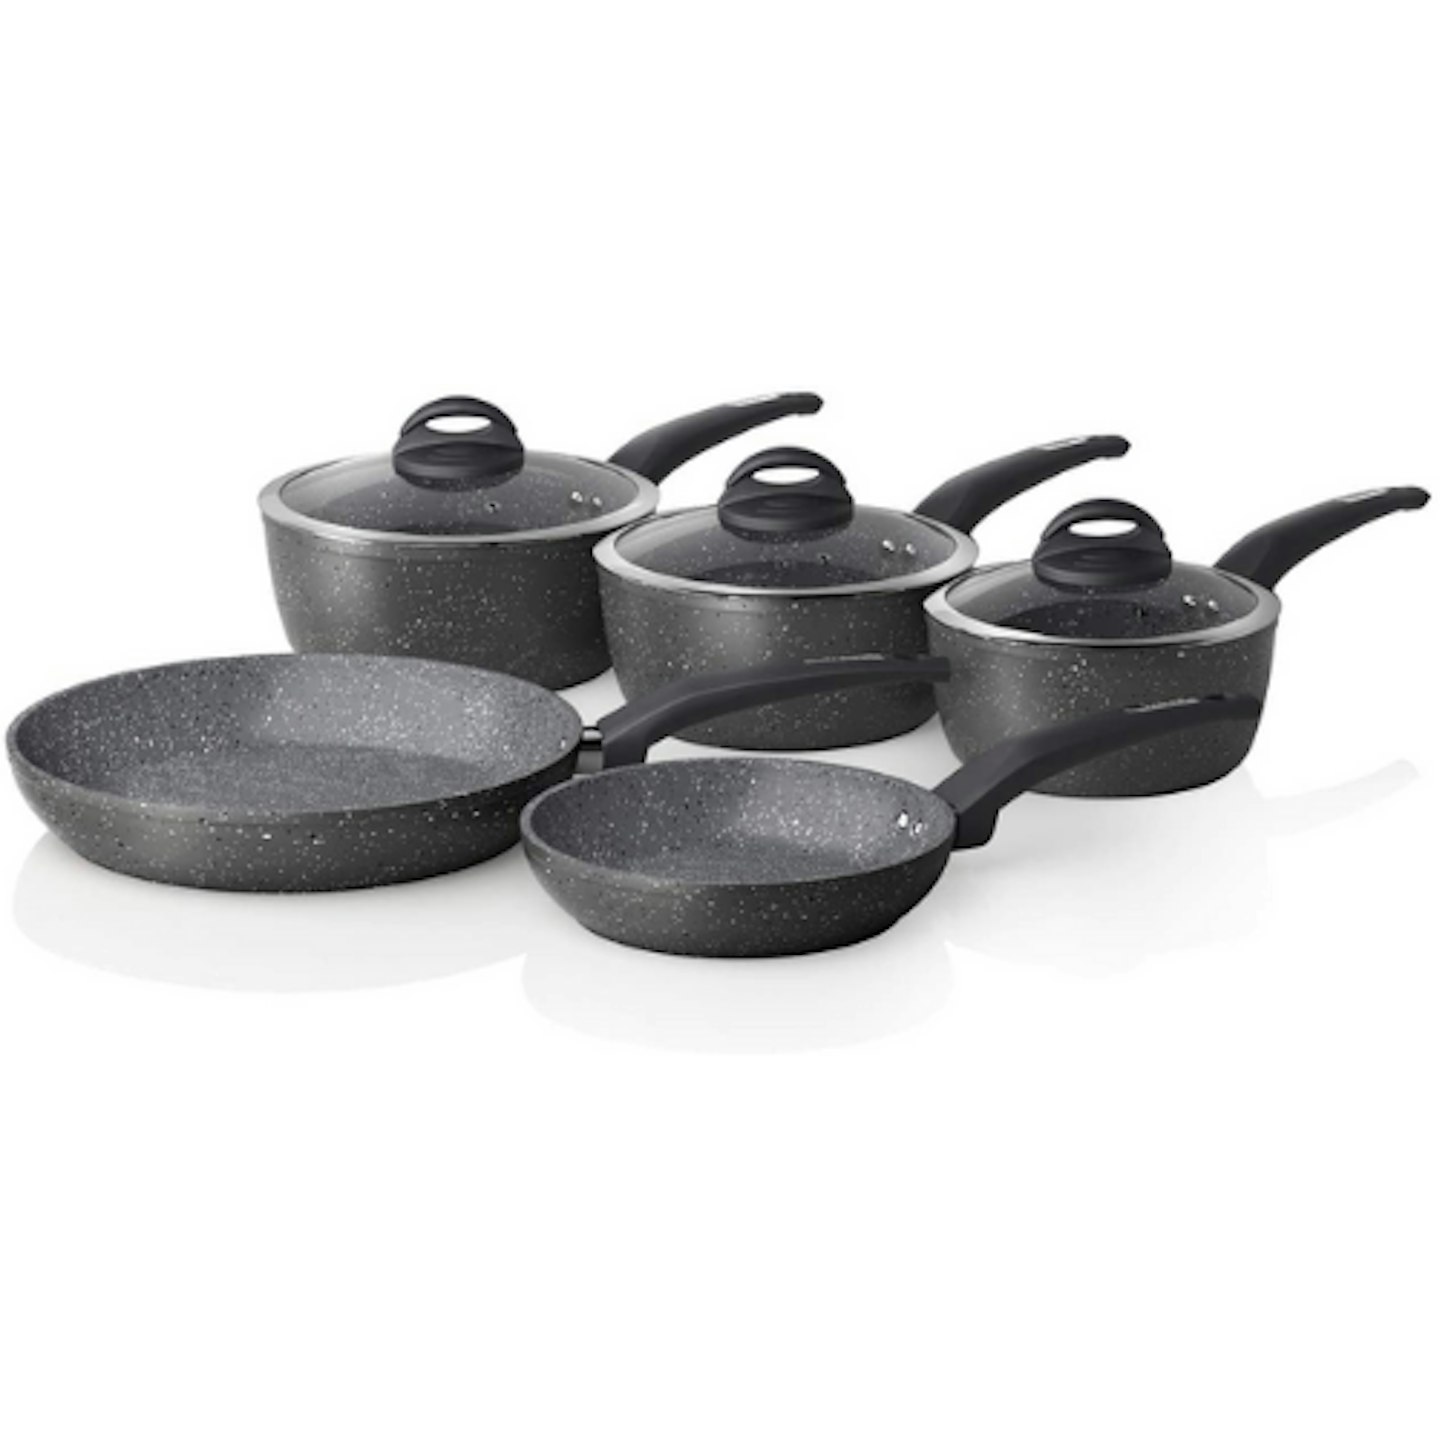 Pots and Pans: Tower Cerastone T81276 Forged 5 Piece Pan Set